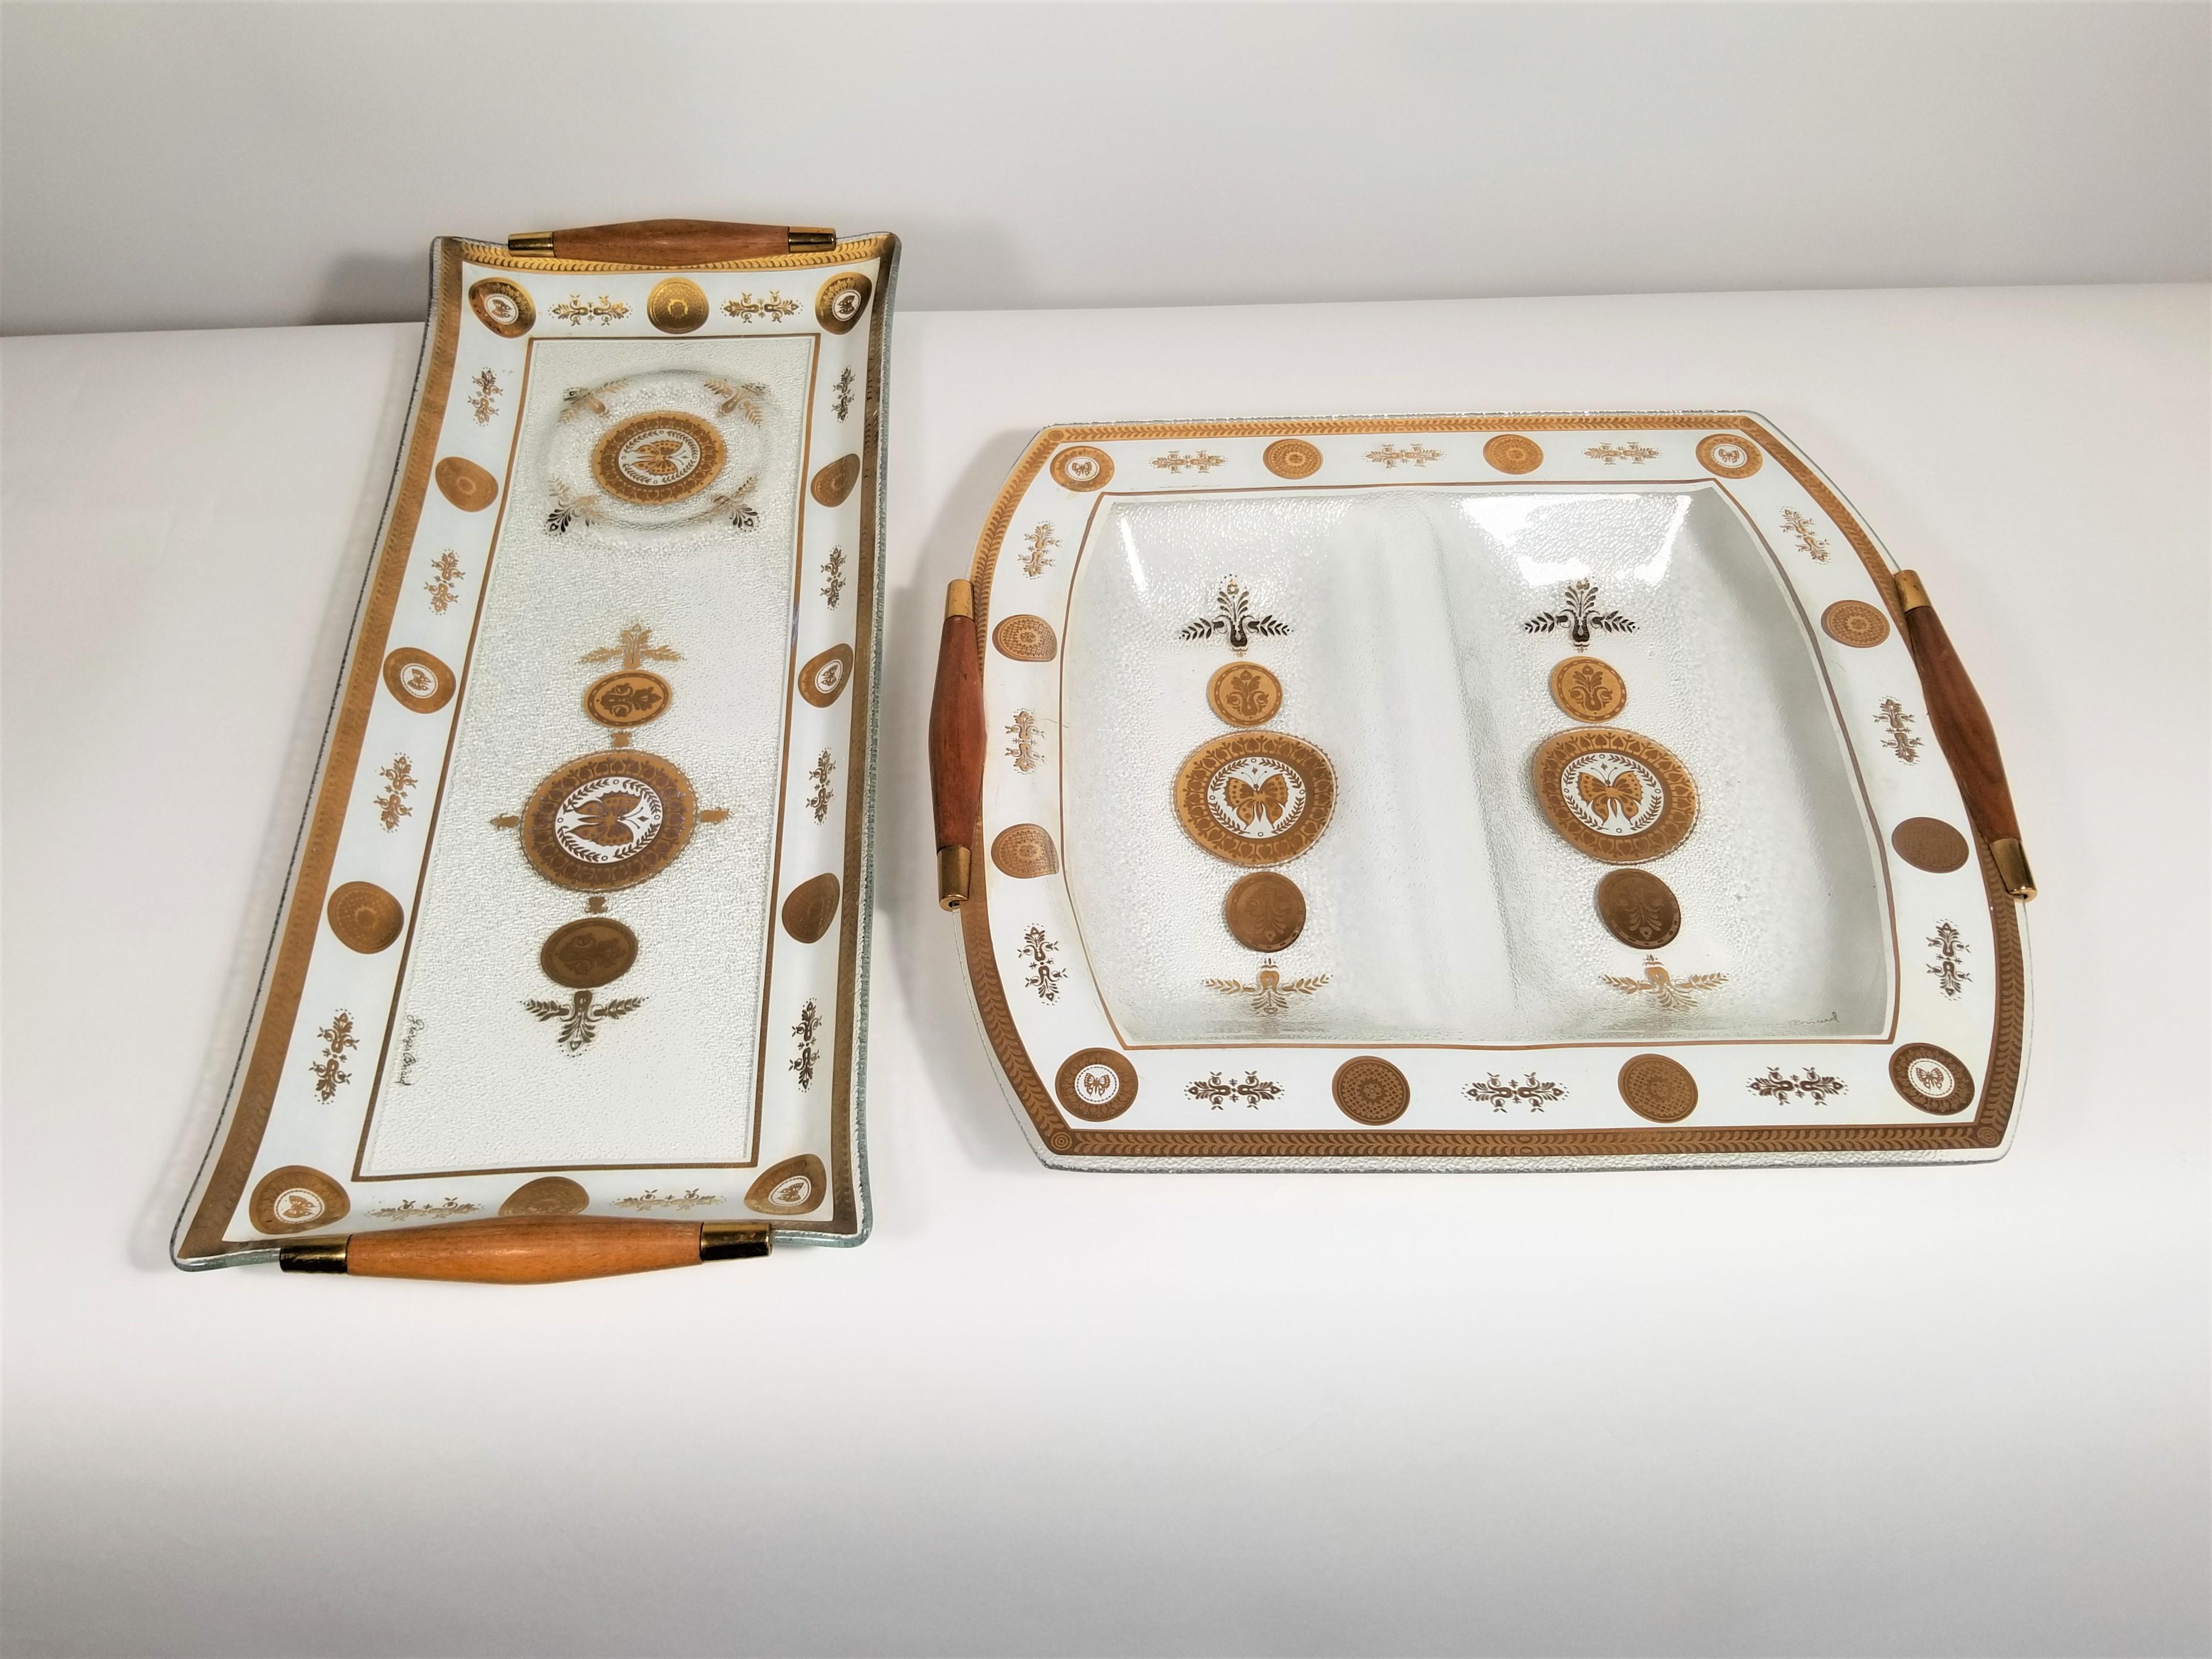 Midcentury 1960s signed Georges Briard Glass Serverware. Set of 2 serving platters or trays. Walnut handles. Gilded accents. Butterfly motif.
Measurements:

Long rectangle:
Height 1.5 inches
Width 19.0 inches
Depth 8.0 inches

Square:
Height 2.0